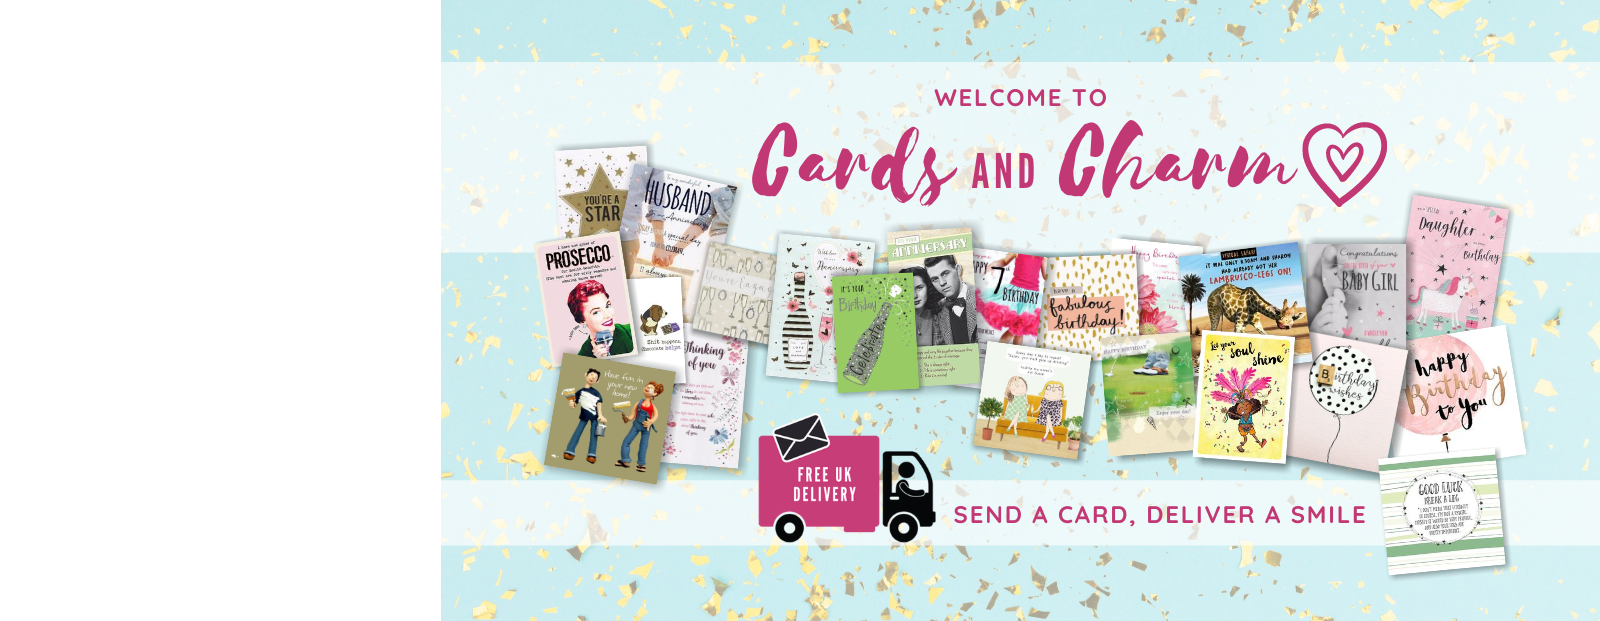 <h2>Welcome to Our Website!</h2><p>Your online card shop with FREE UK DELIVERY on all orders!</p>